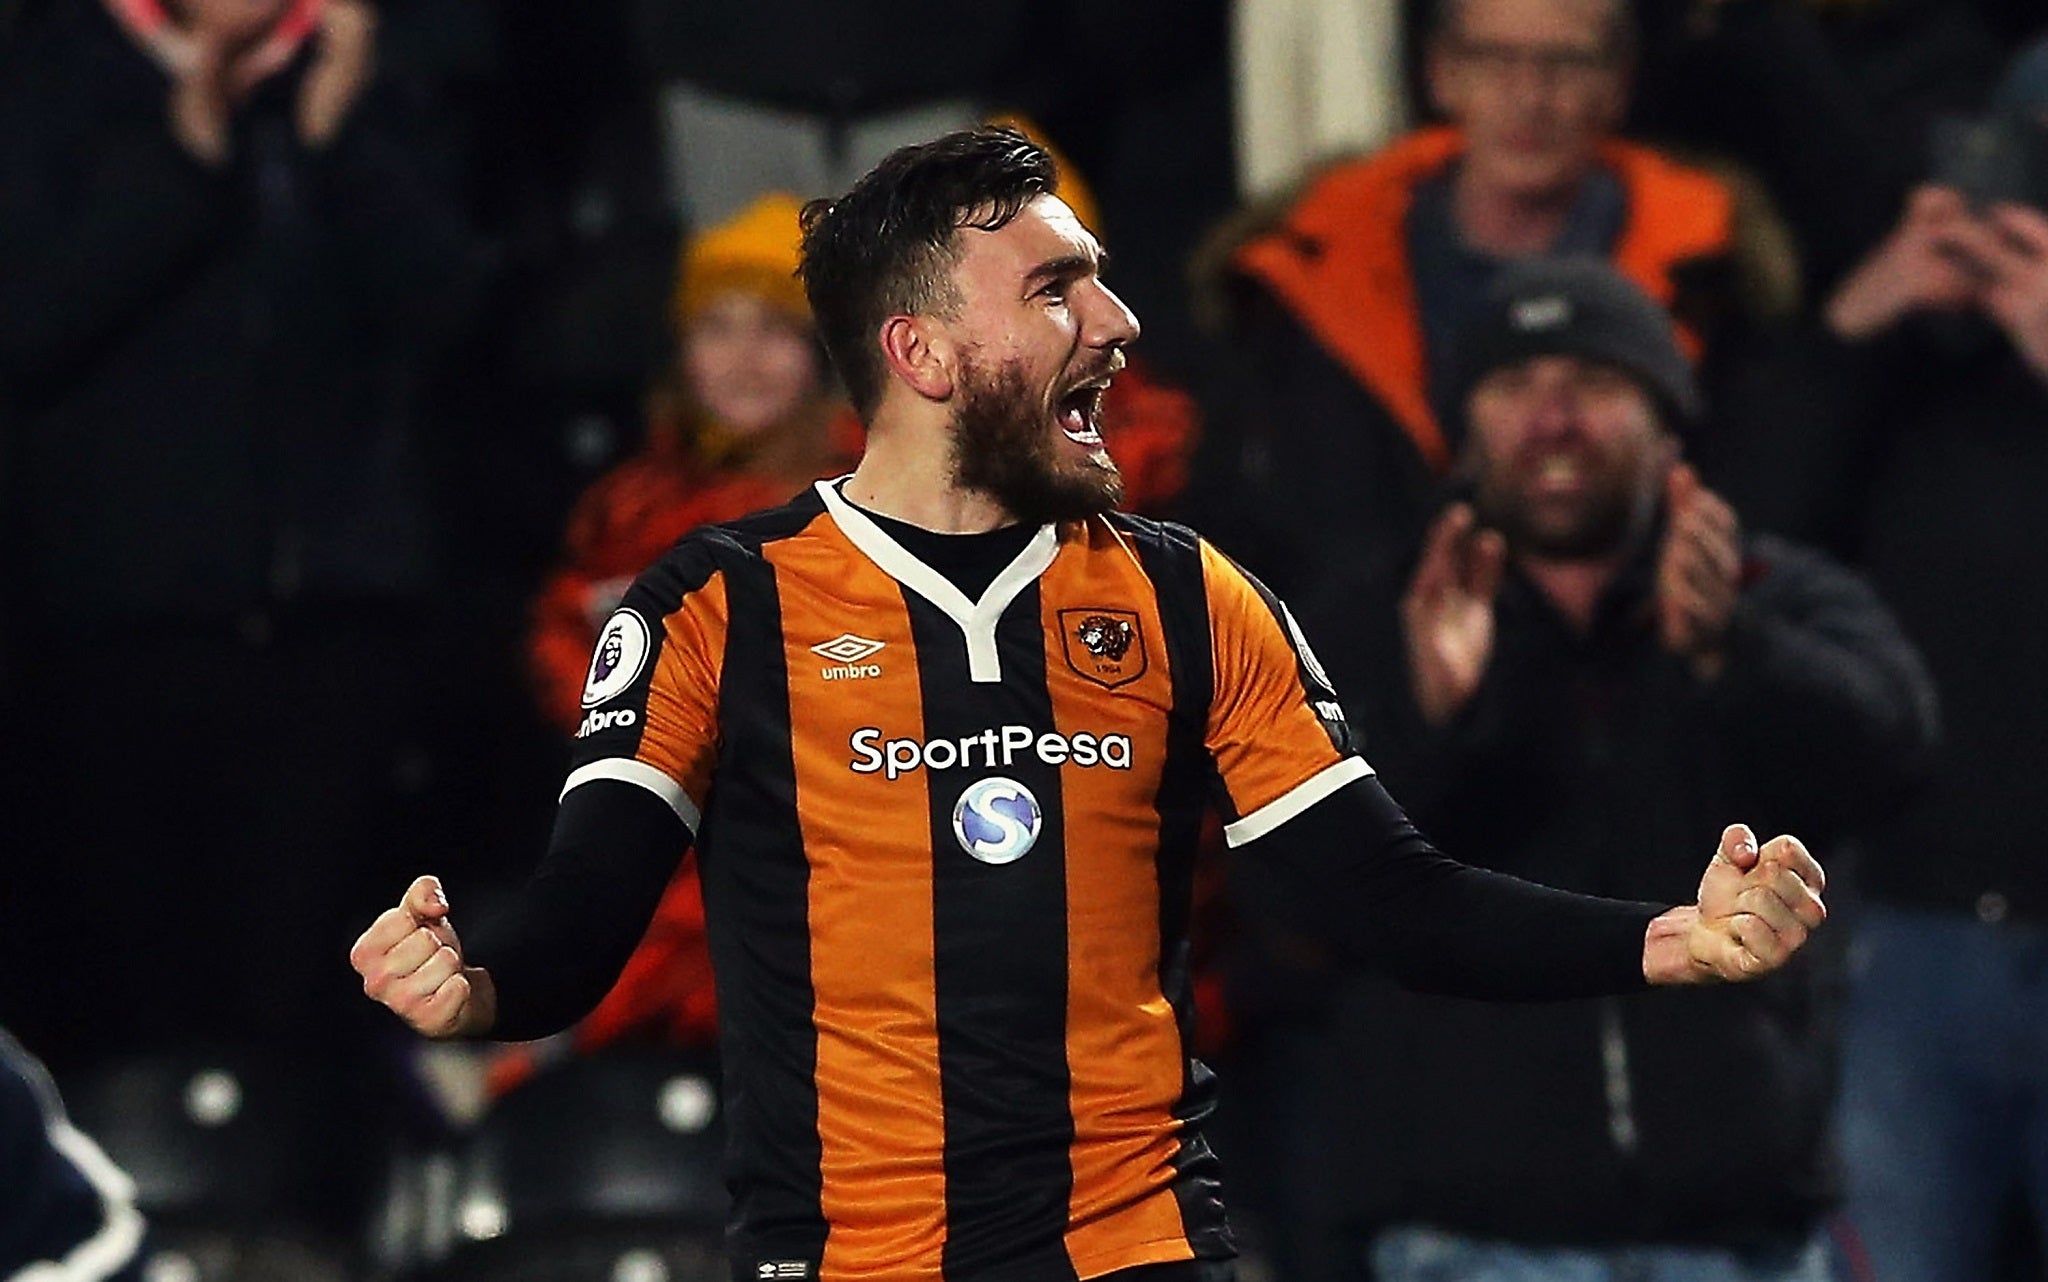 Robert Snodgrass celebrating what Hull thought was the winning goal